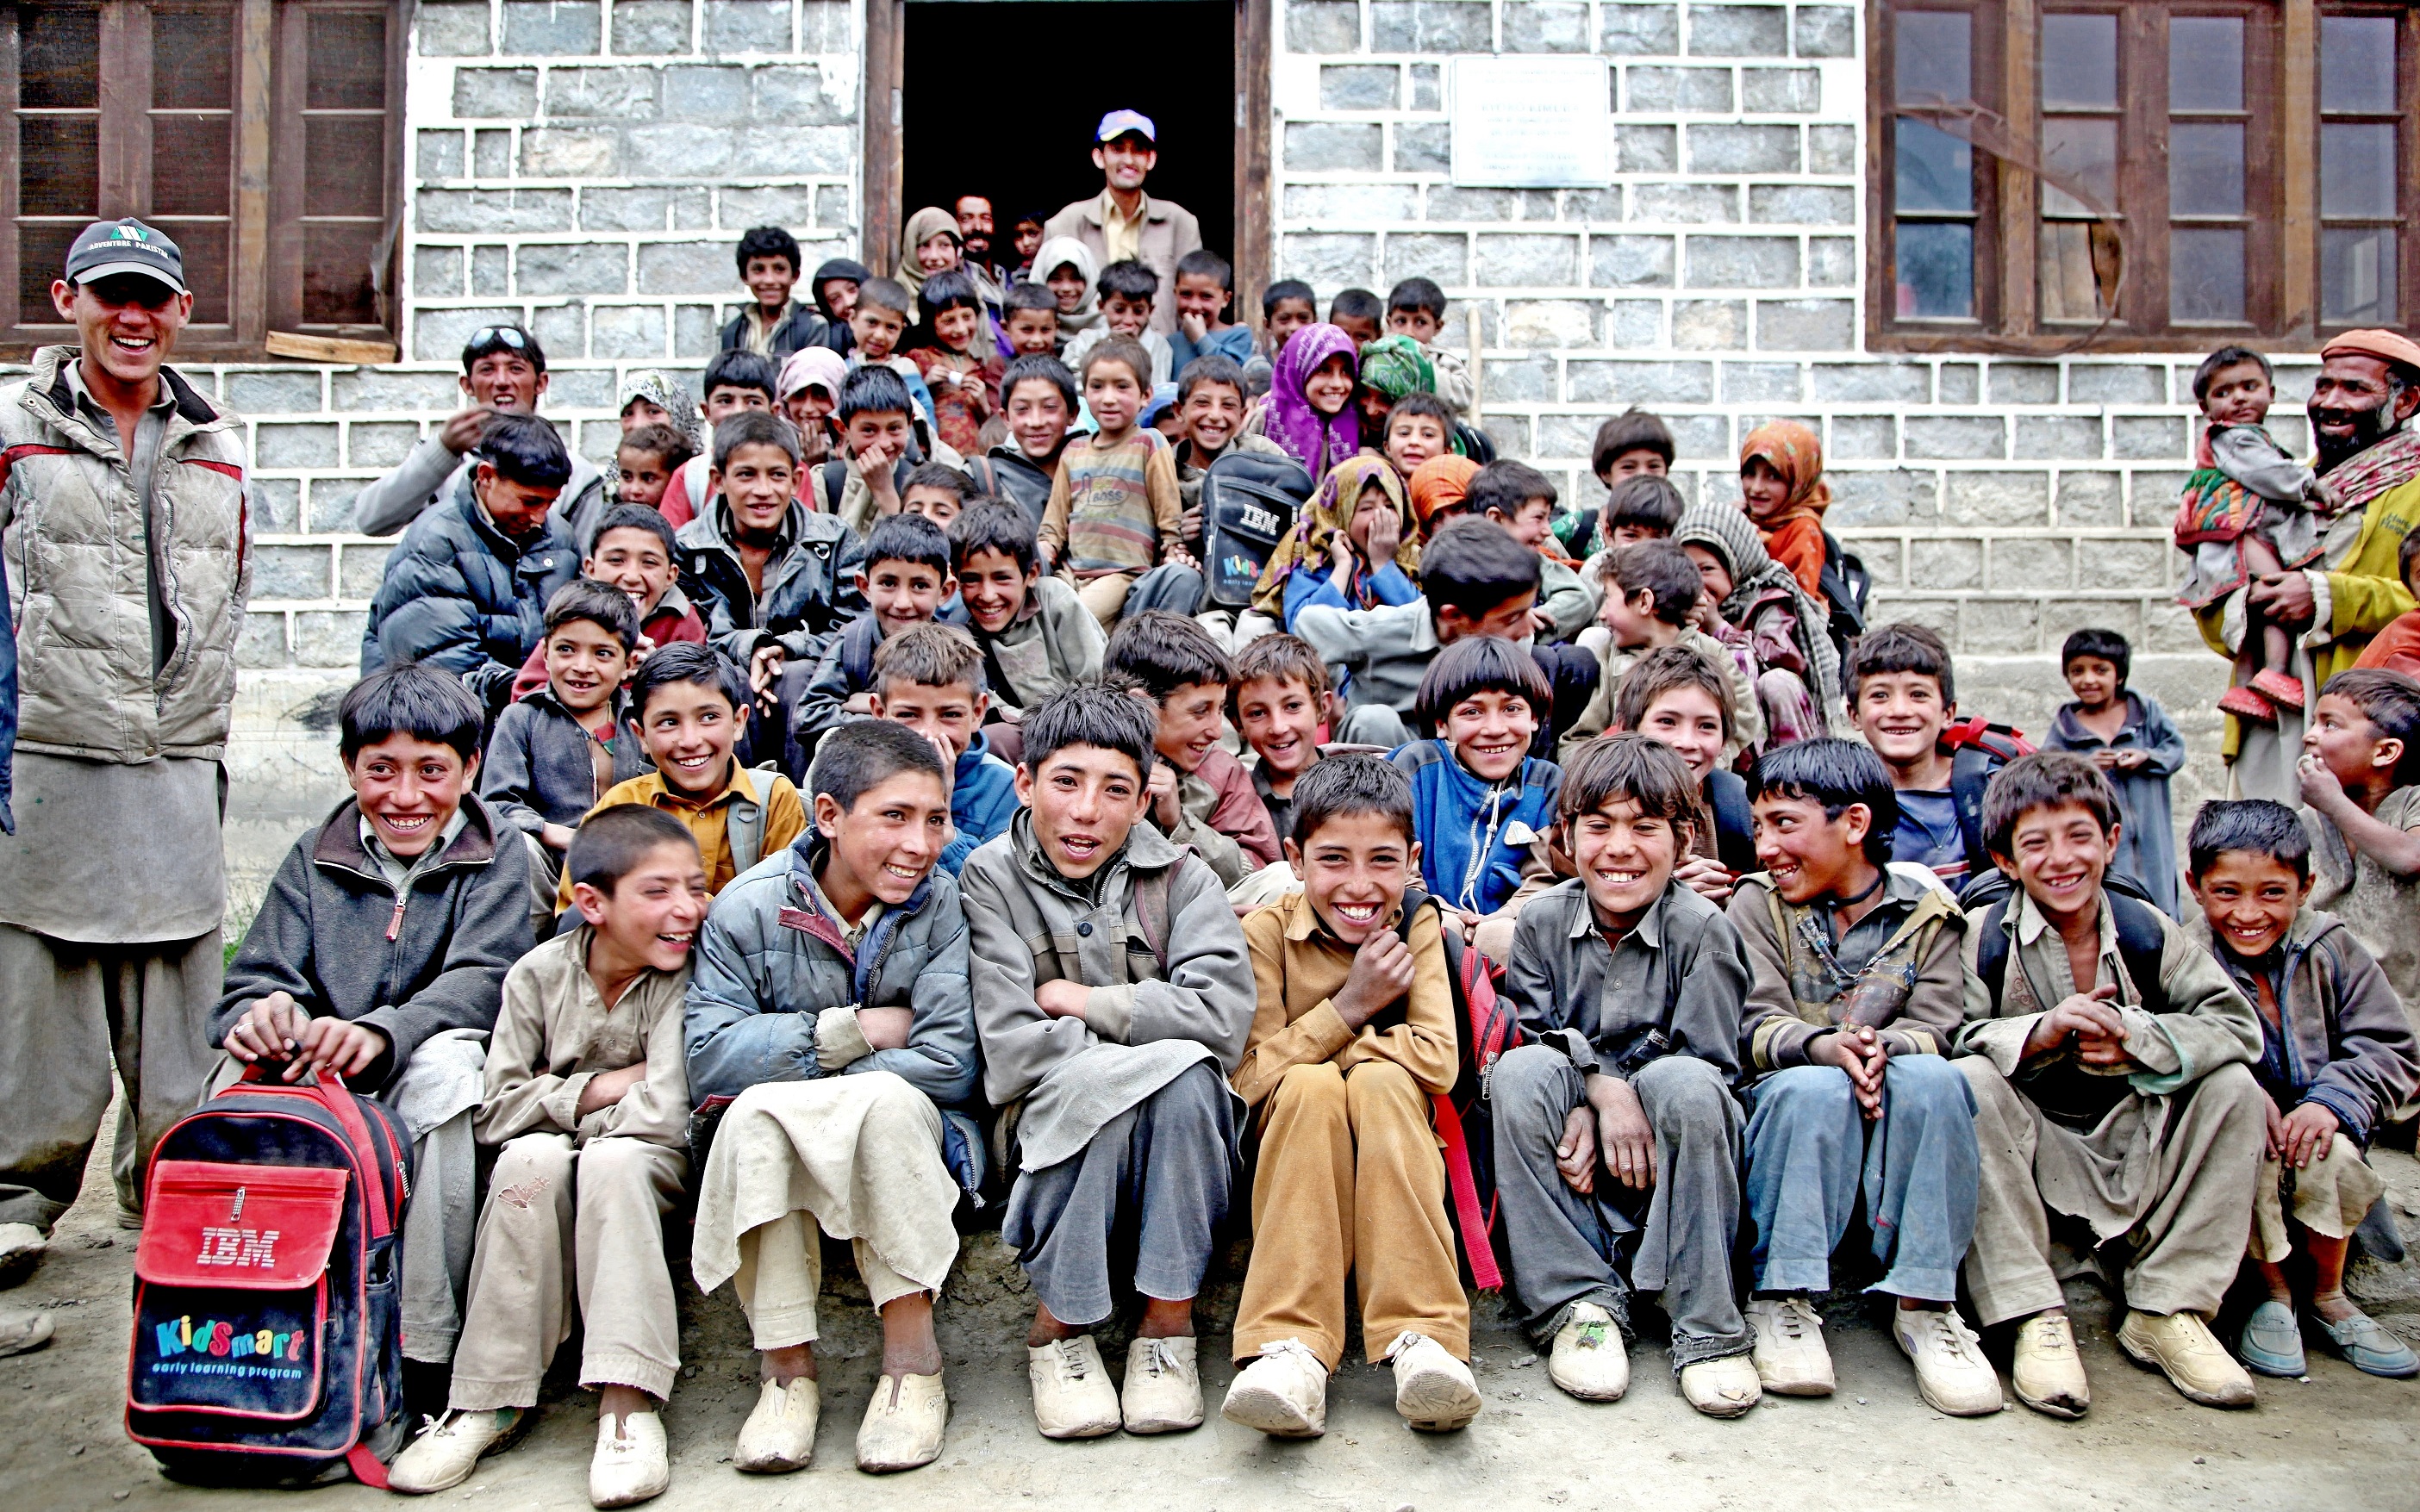 We give the children of the Himalayas the gift of hope.